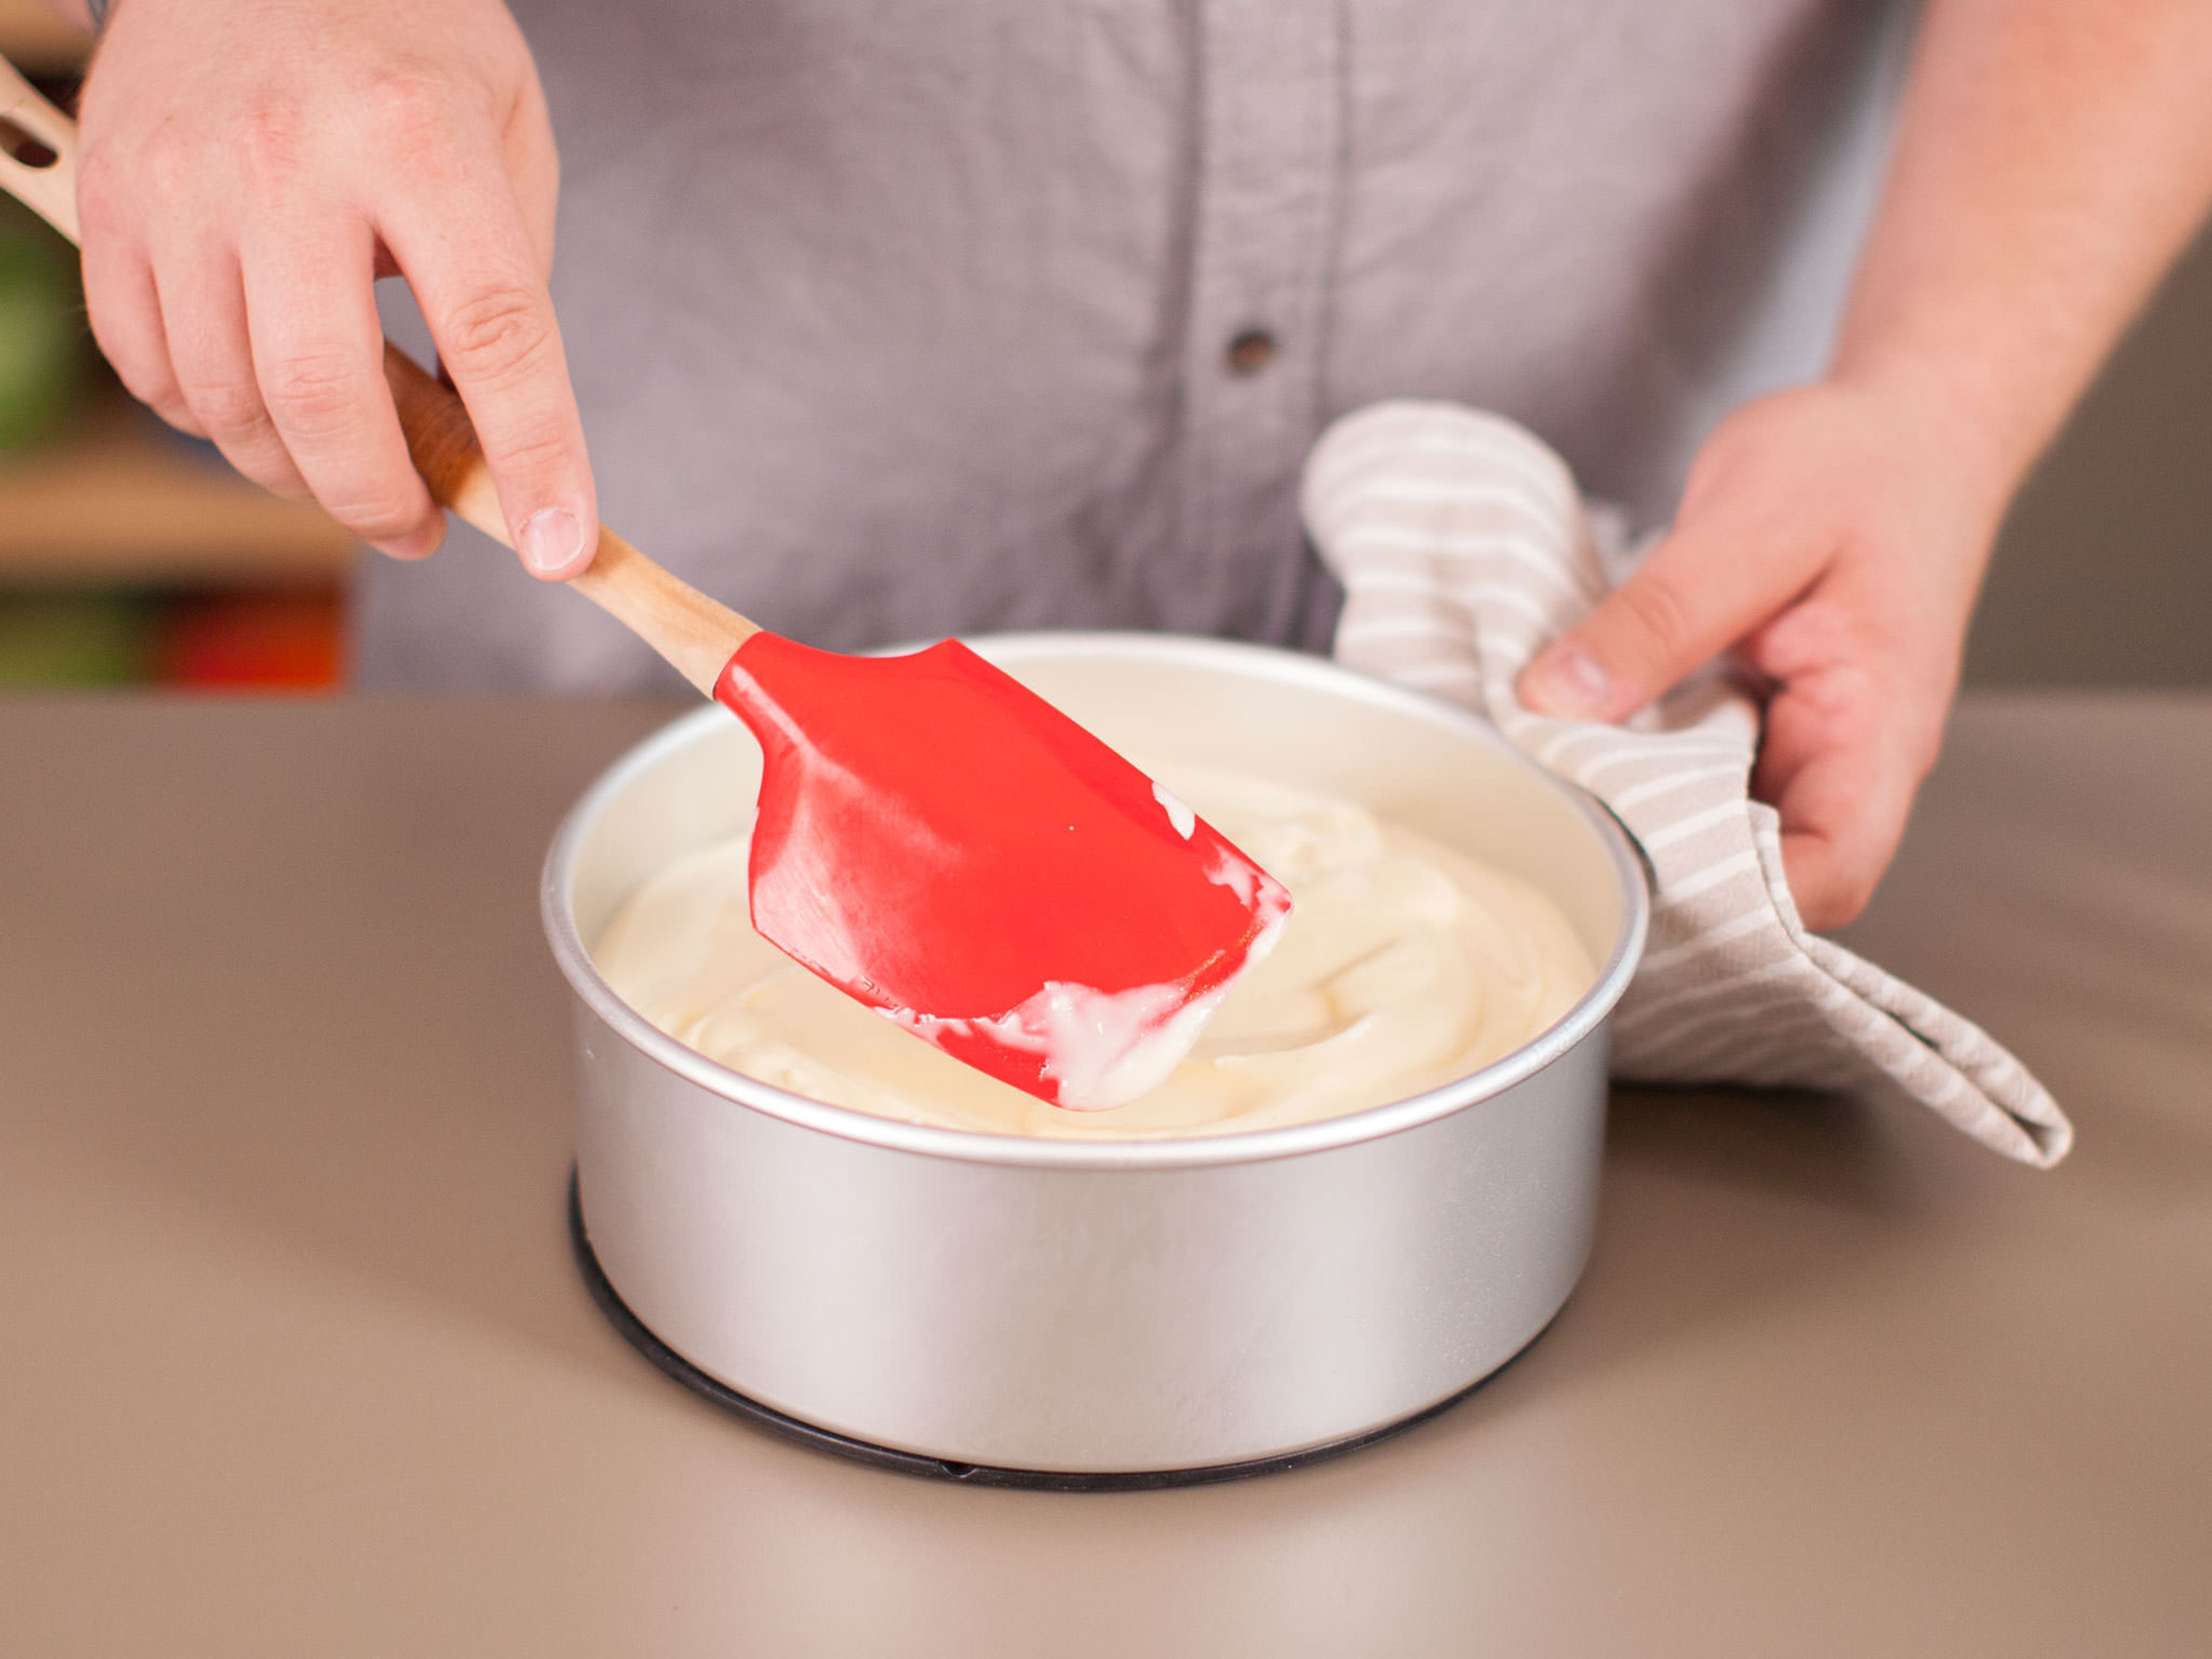 Remove springform pan from oven and reduce temperature to 160°C/320°F. Fill cream cheese mixture into pan and smooth out surface. Return to oven and bake for approx. 50 – 55 min. until the filling has set.